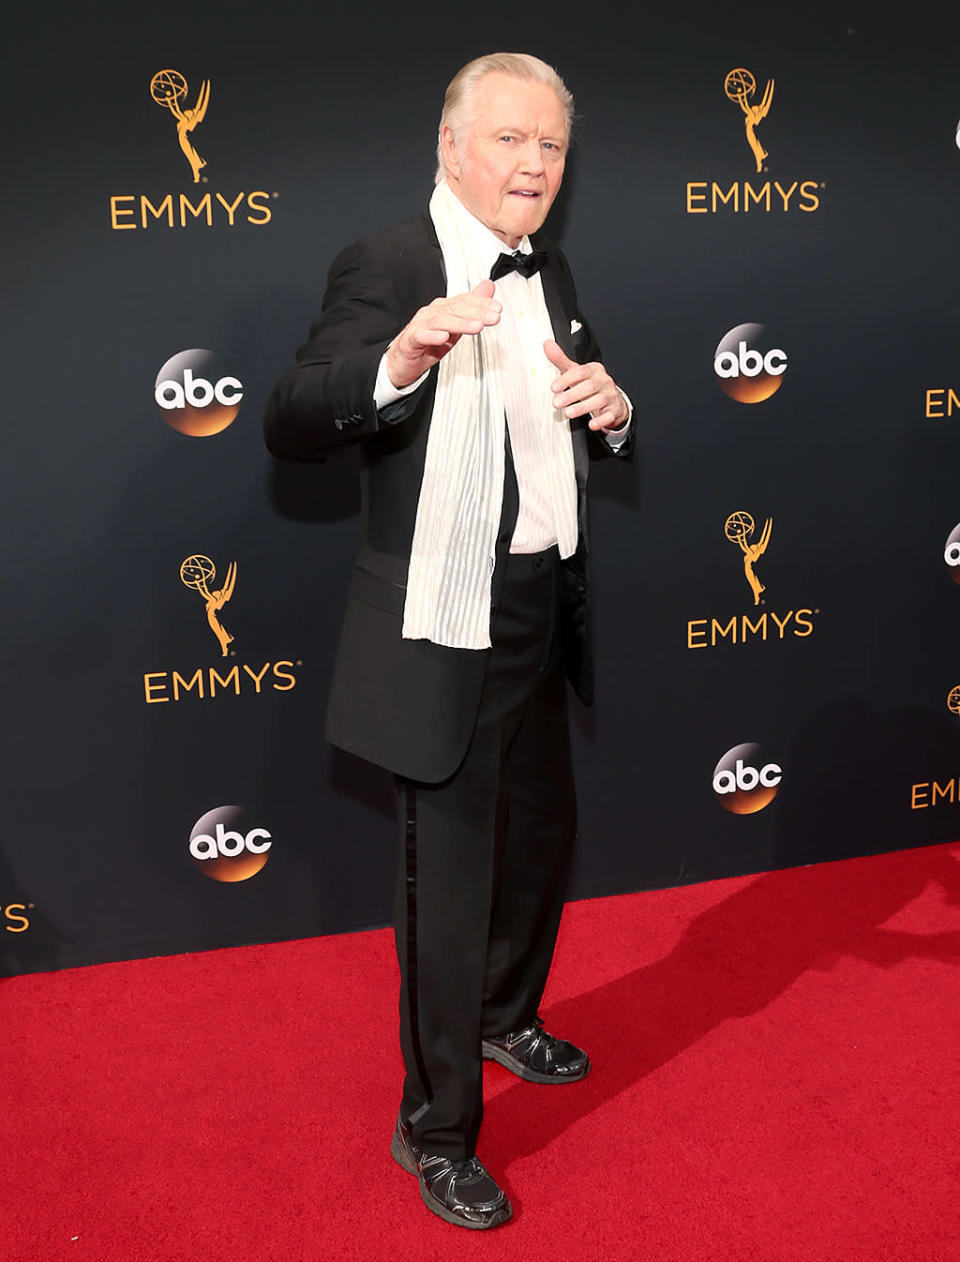 <p>Jon Voight attends the 68th Annual Primetime Emmy Awards at Microsoft Theater on September 18, 2016 in Los Angeles, California. (Photo by Todd Williamson/Getty Images)</p>